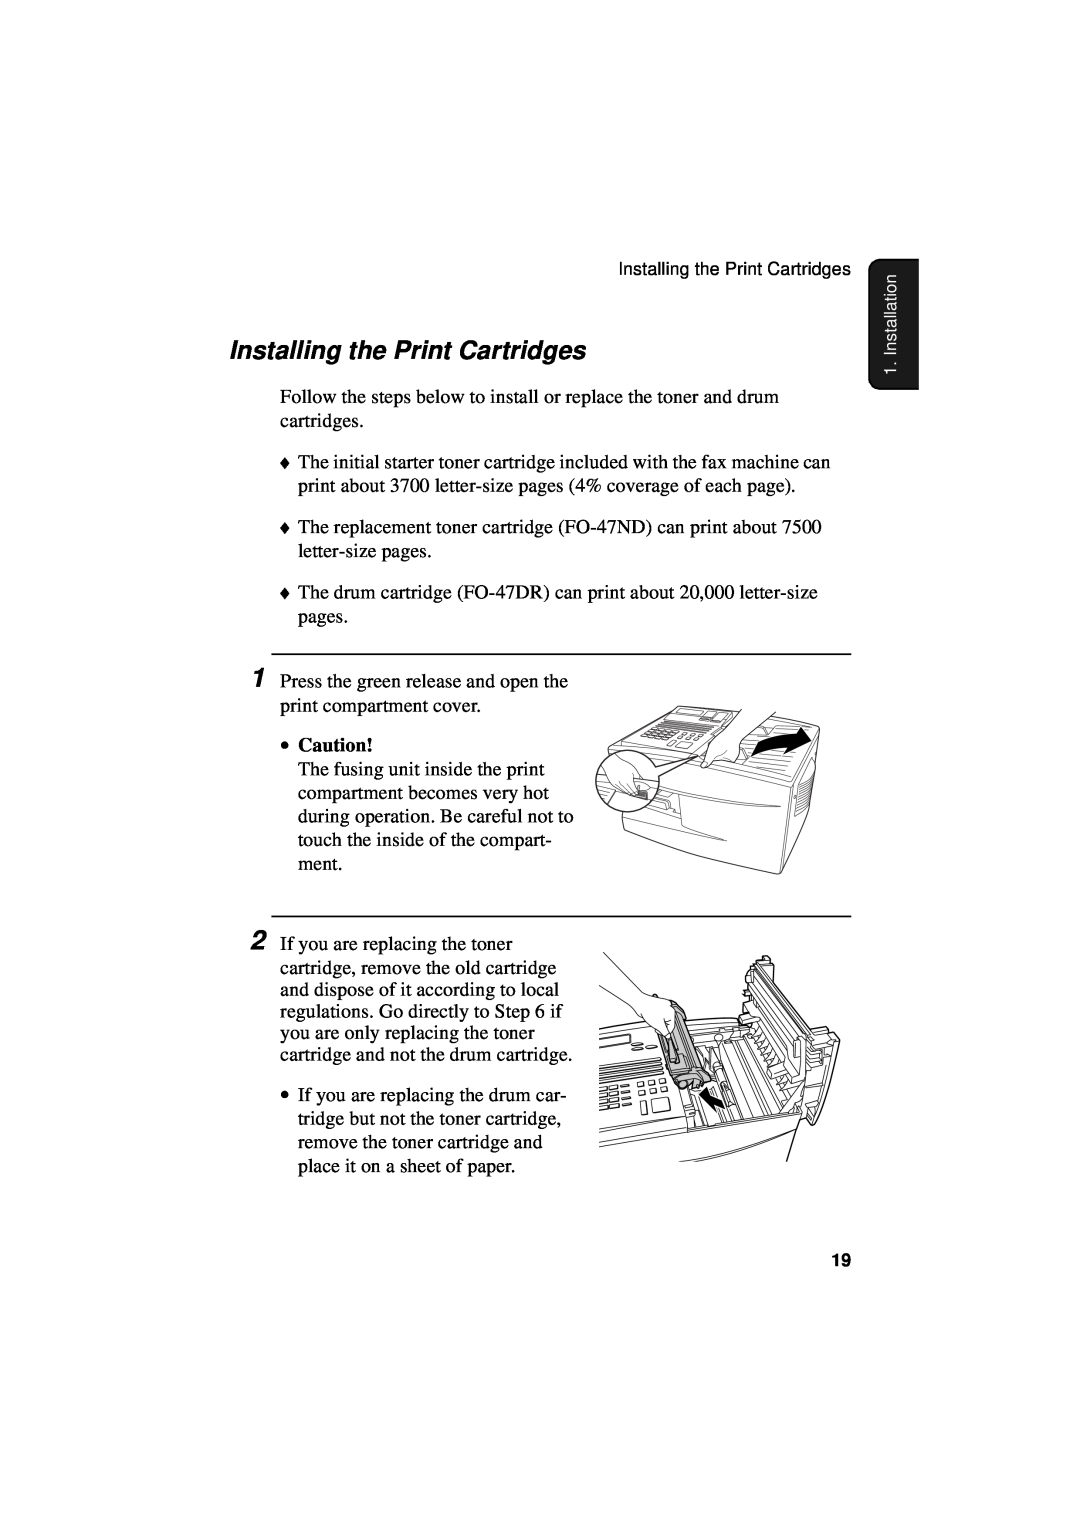 Sharp FO-5700, FO-4700, FO-5550 operation manual Installing the Print Cartridges, ∙ Caution 